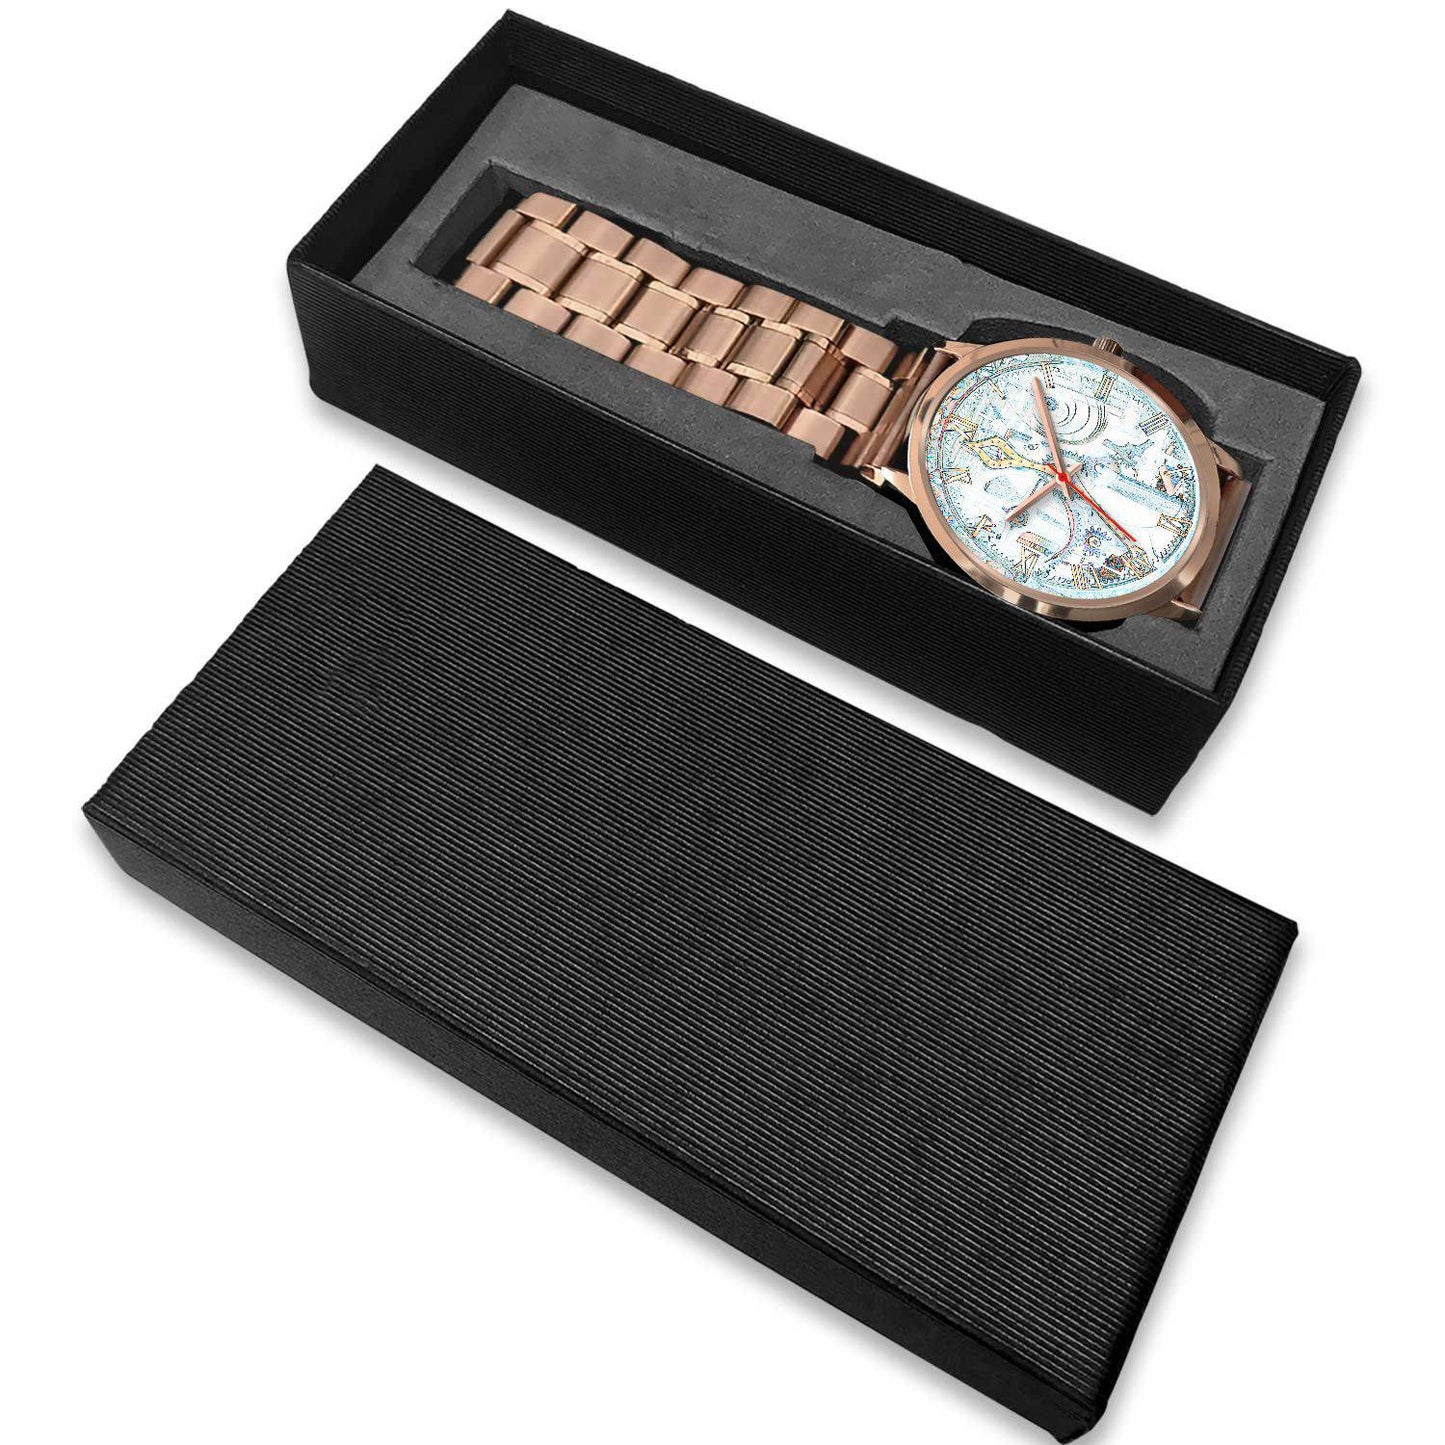 ROSE GOLD WATCH - FROZEN IN TIME - LIVINGARTLIFESTYLE